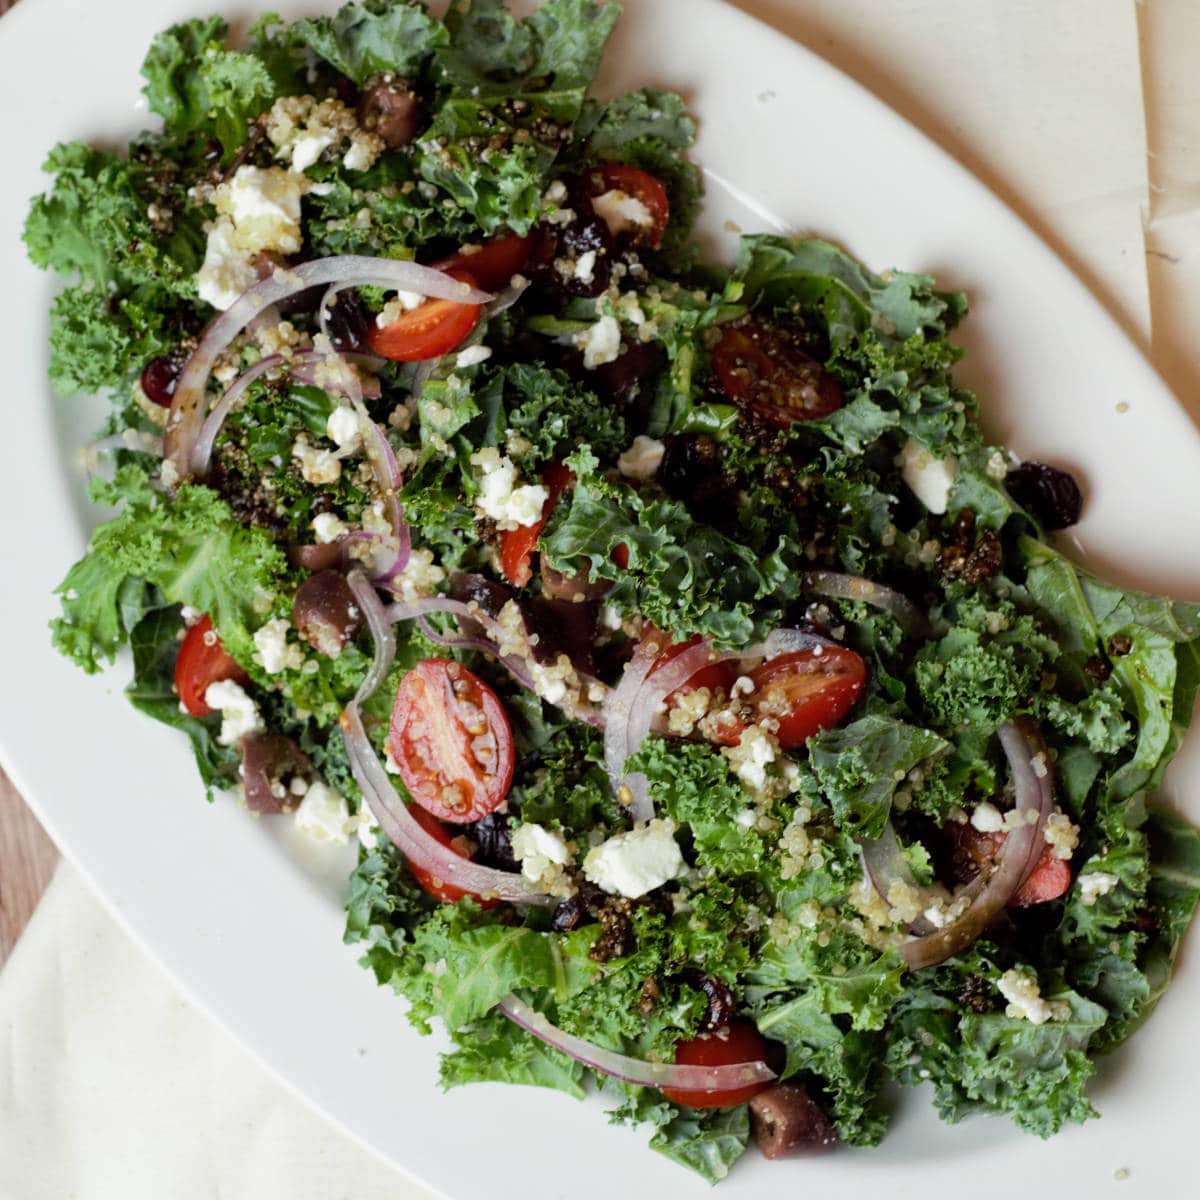 Overhead view of a Greek kale quinoa salad placed on a white plate.